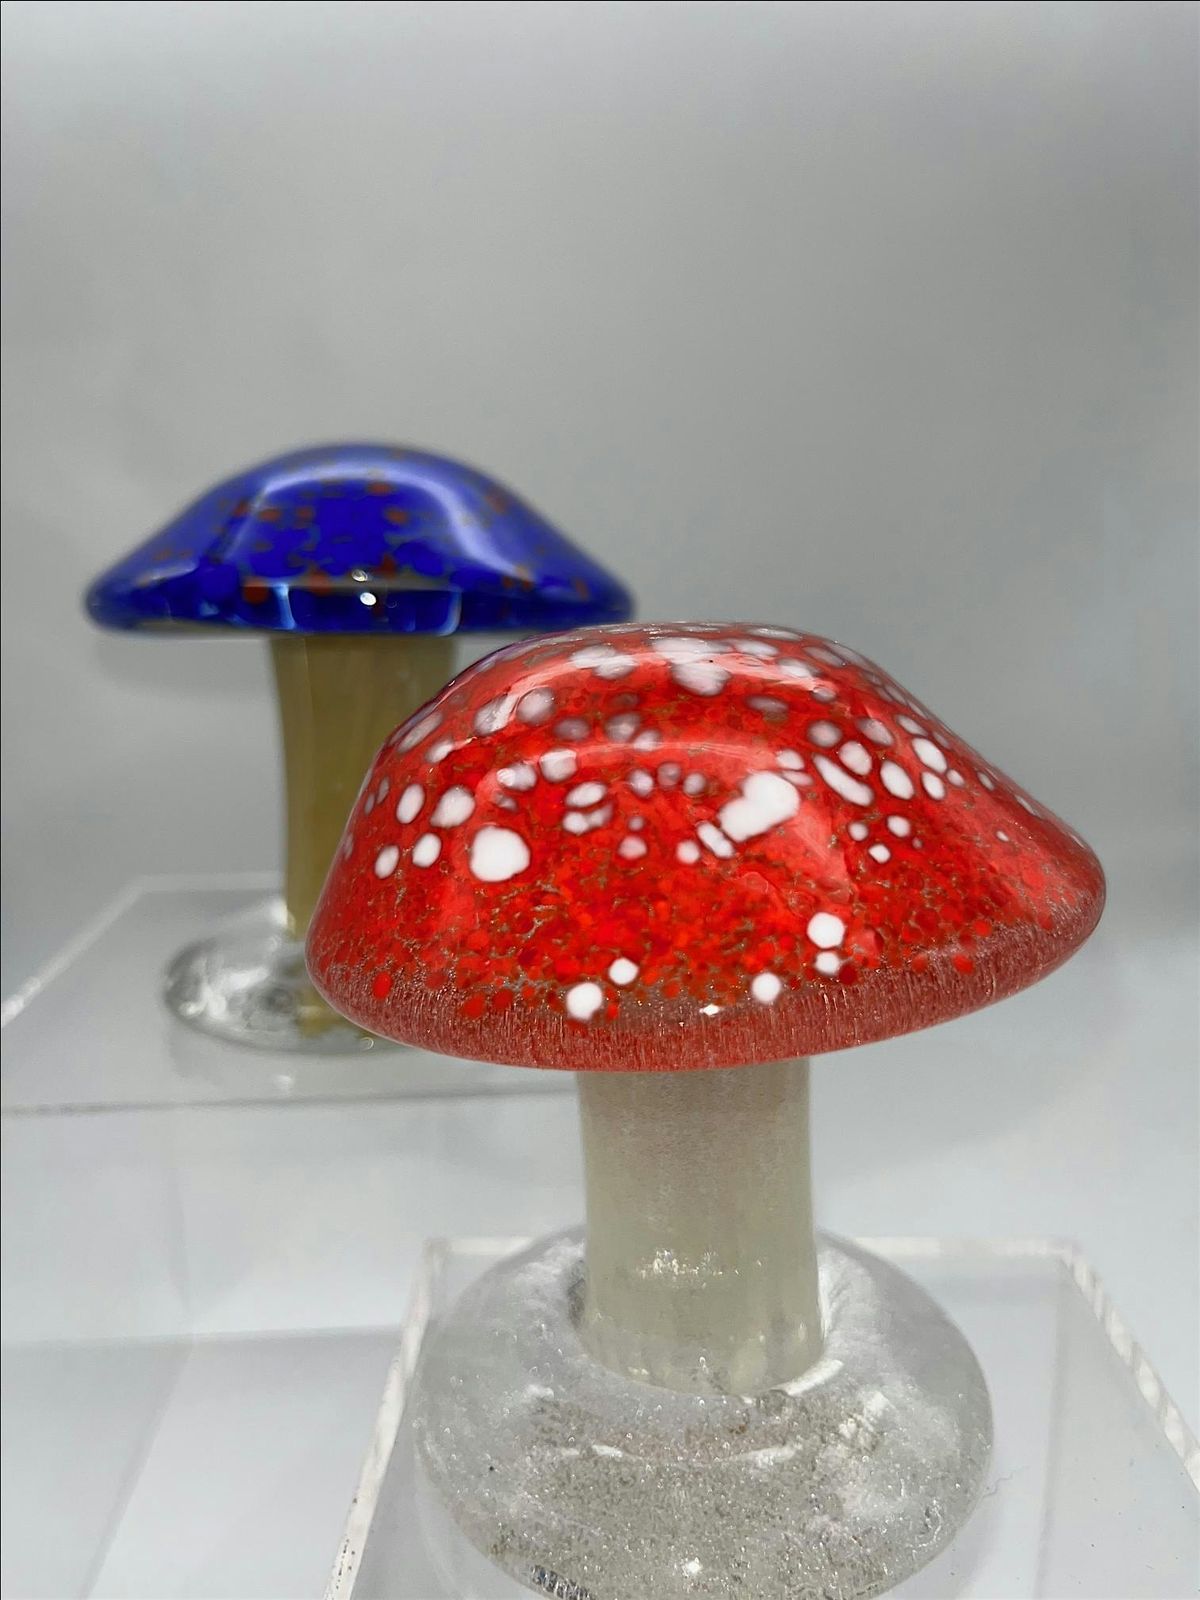 Holy Fungus!!  Create your own magic mushroom. They always grow in groups!